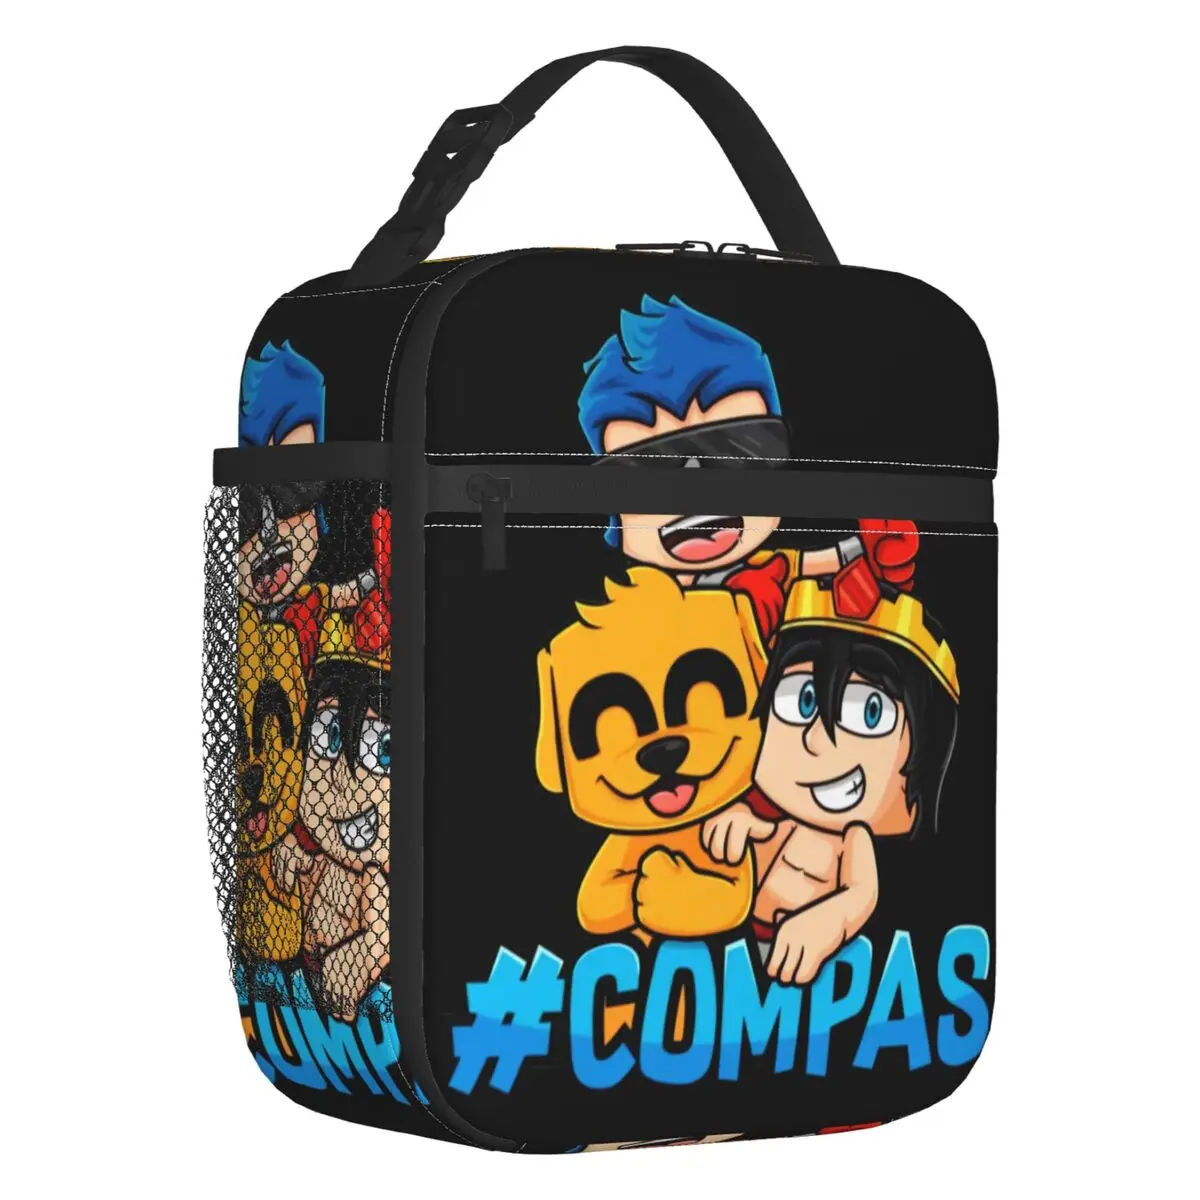 Compas Mikecrack Thermal Insulated Lunch Bag Anime Cartoon Resuable Lunch Container for School Travel Multifunction Food Box